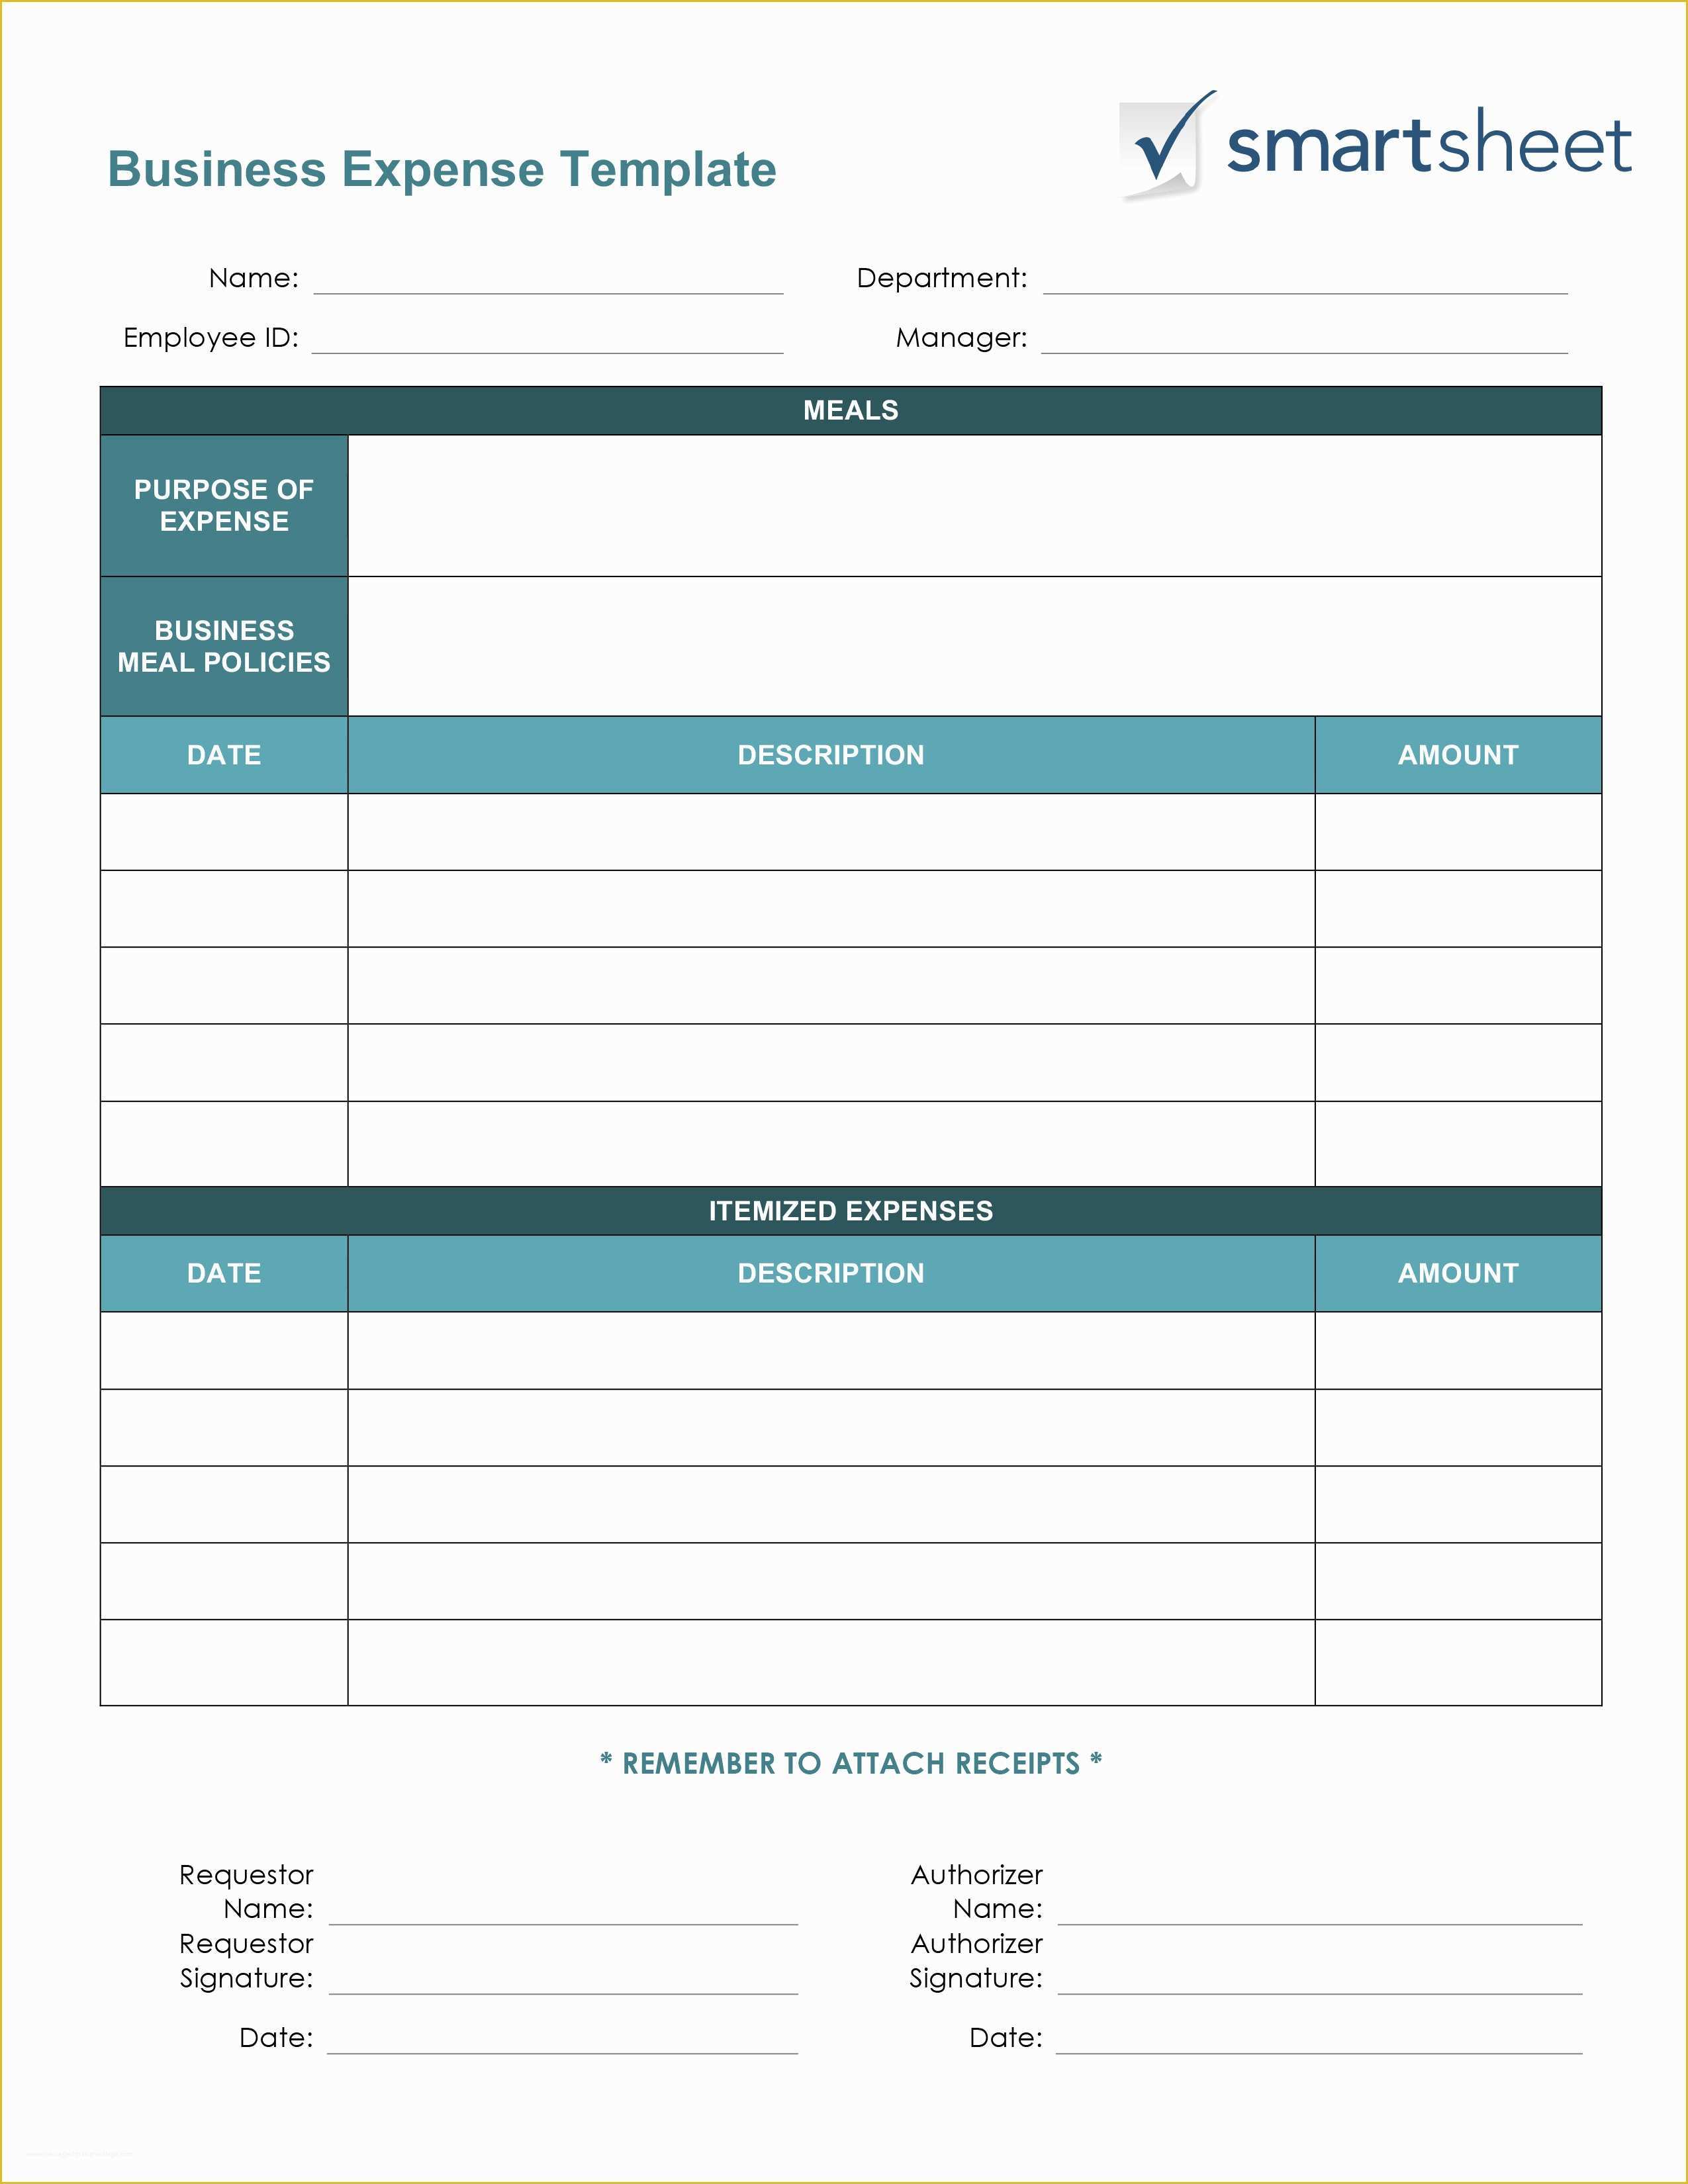 travel expenses template free download